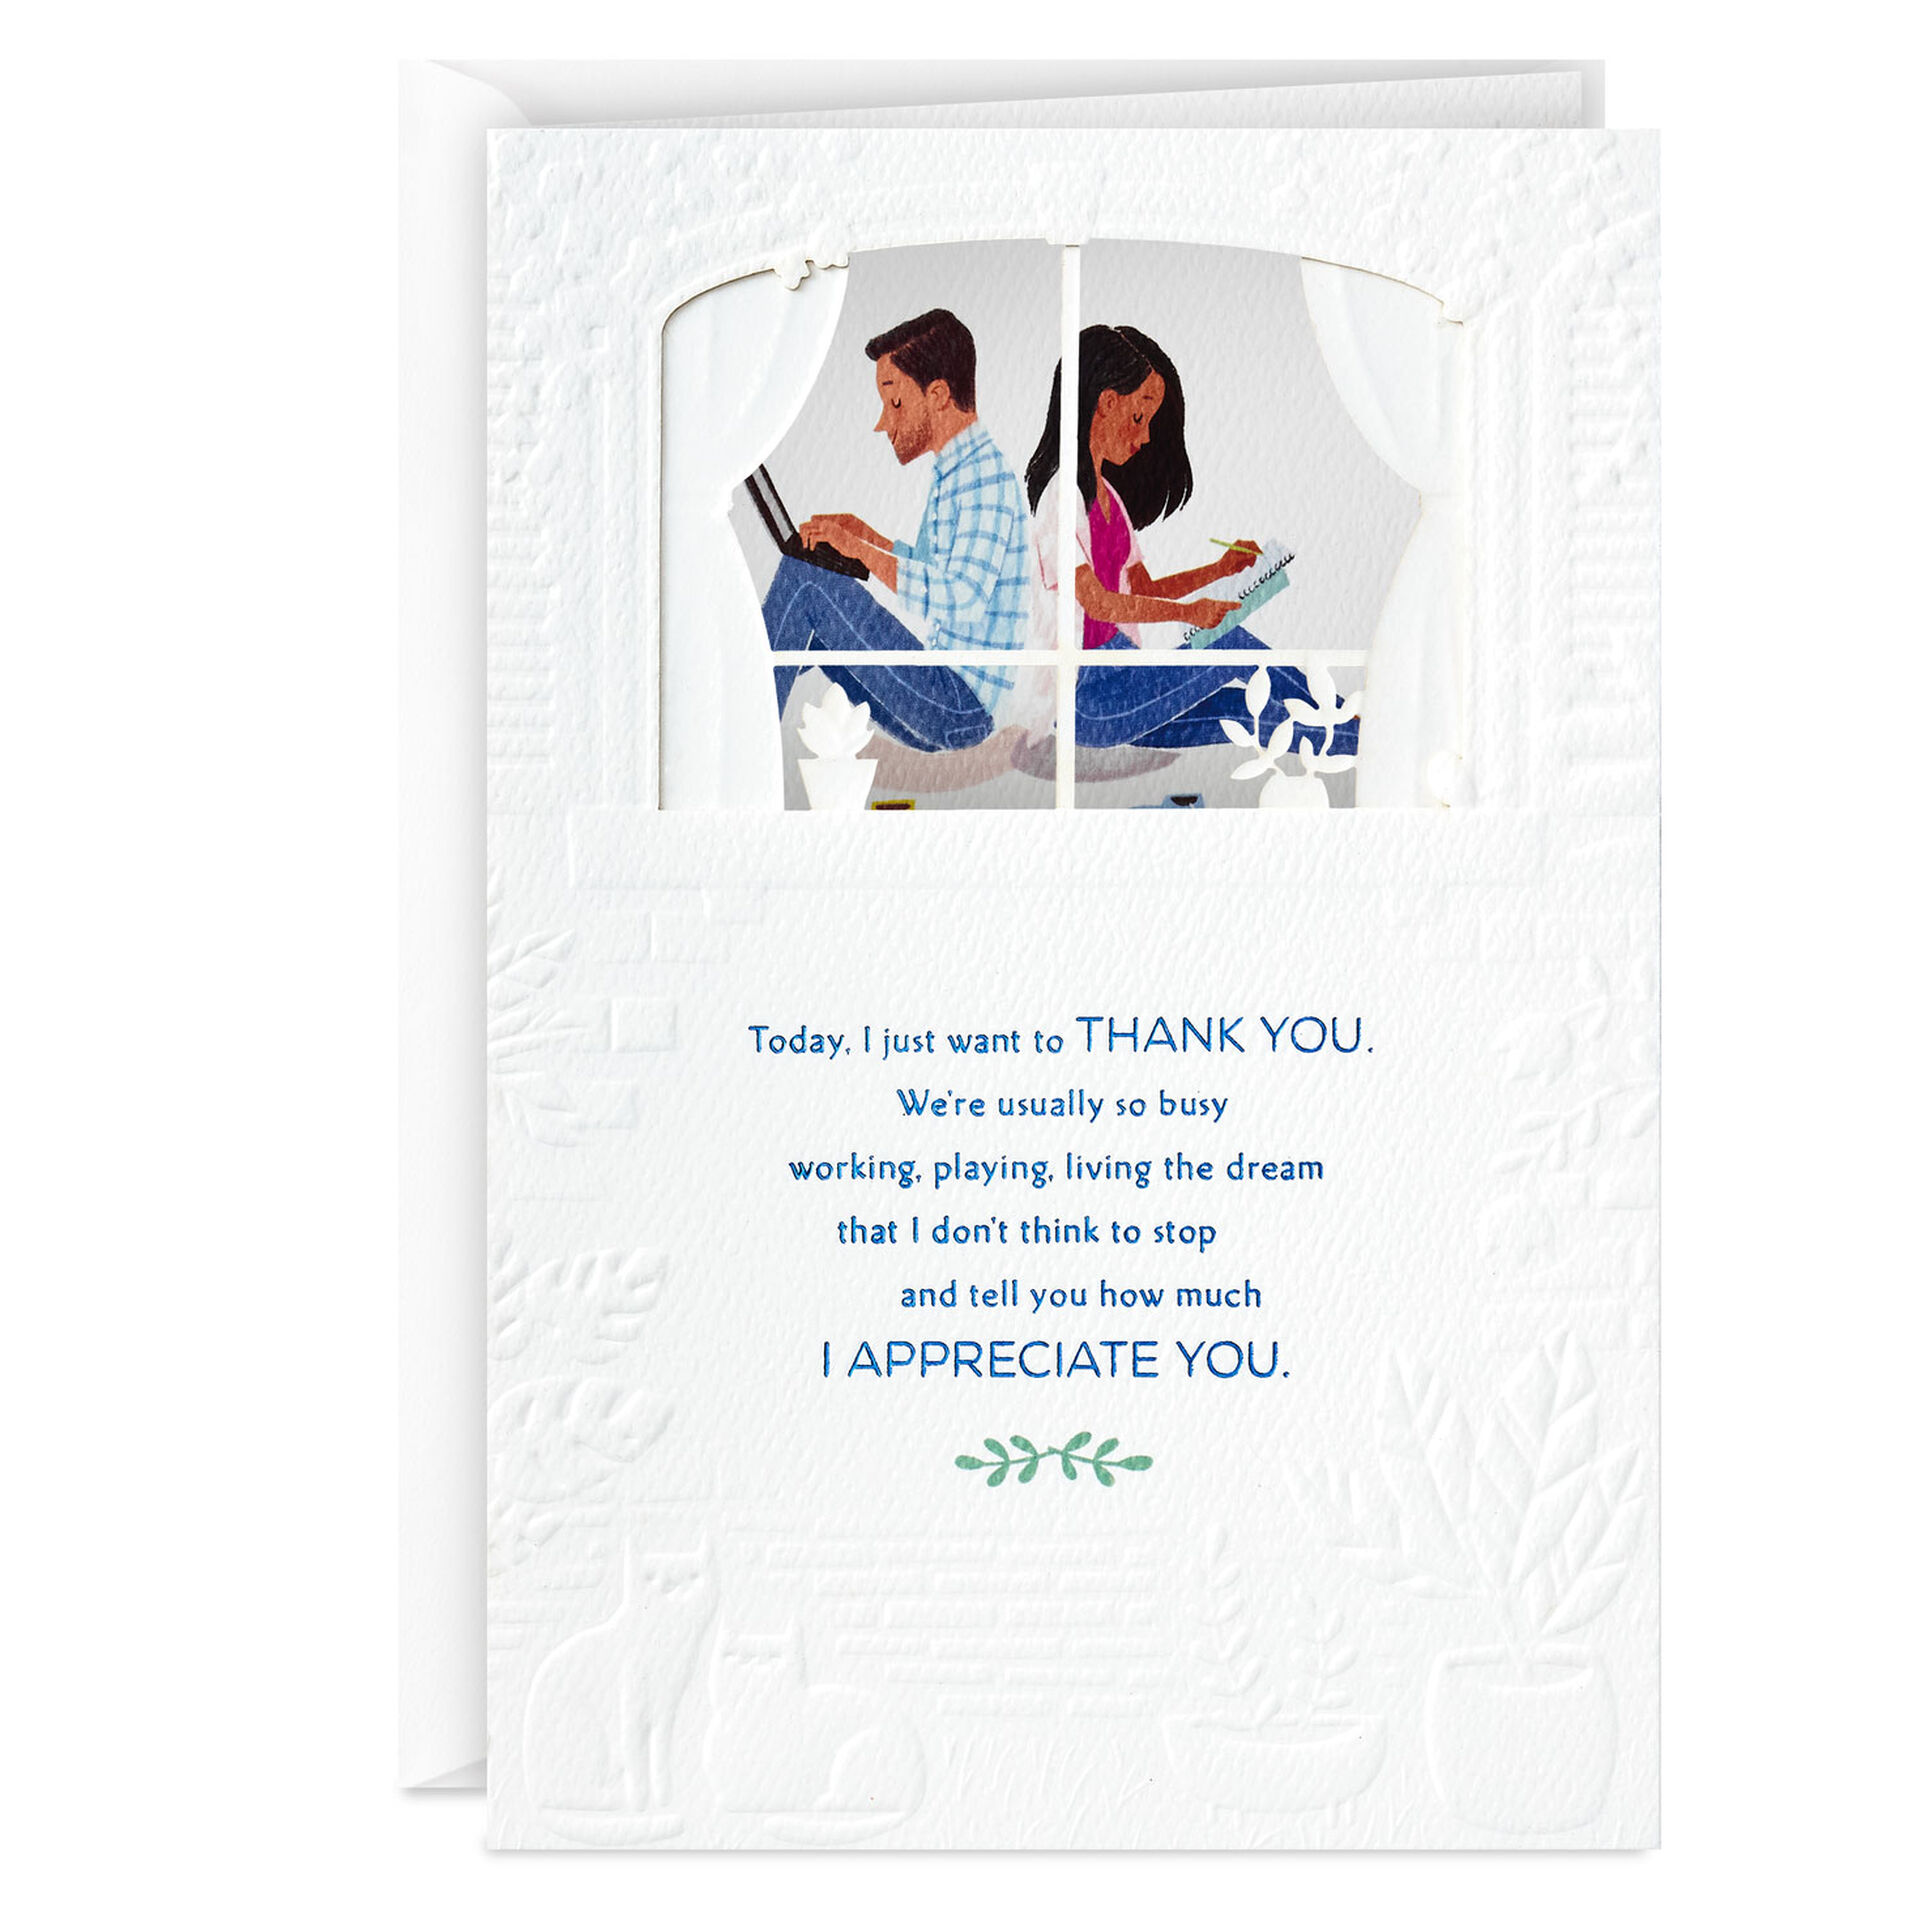 Couple-in-Window-of-House-Love-Card_659AVY2994_01